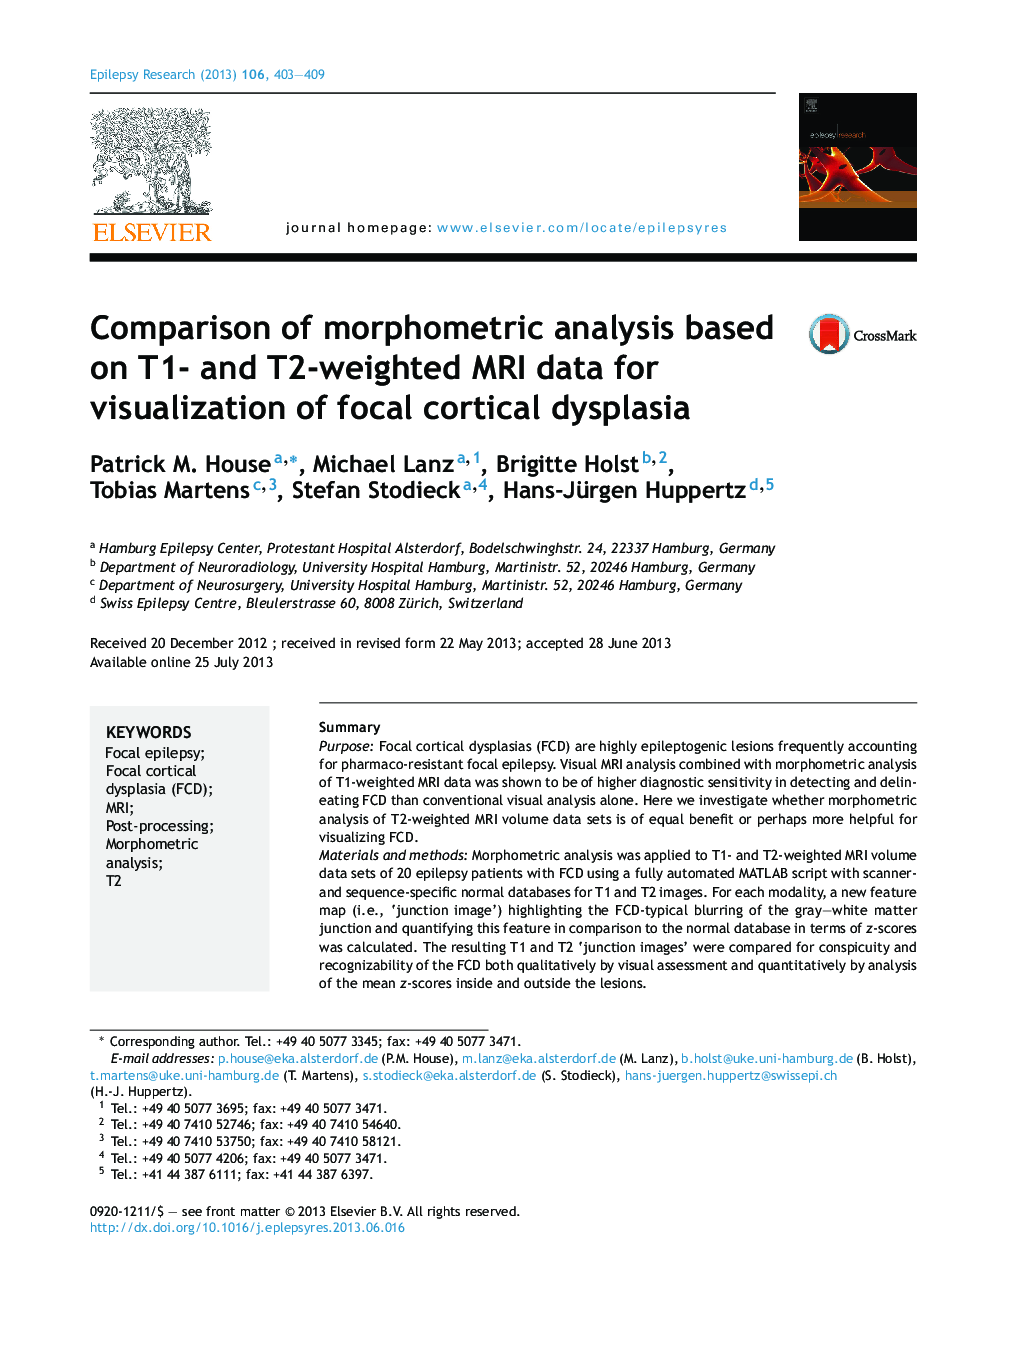 Comparison of morphometric analysis based on T1- and T2-weighted MRI data for visualization of focal cortical dysplasia